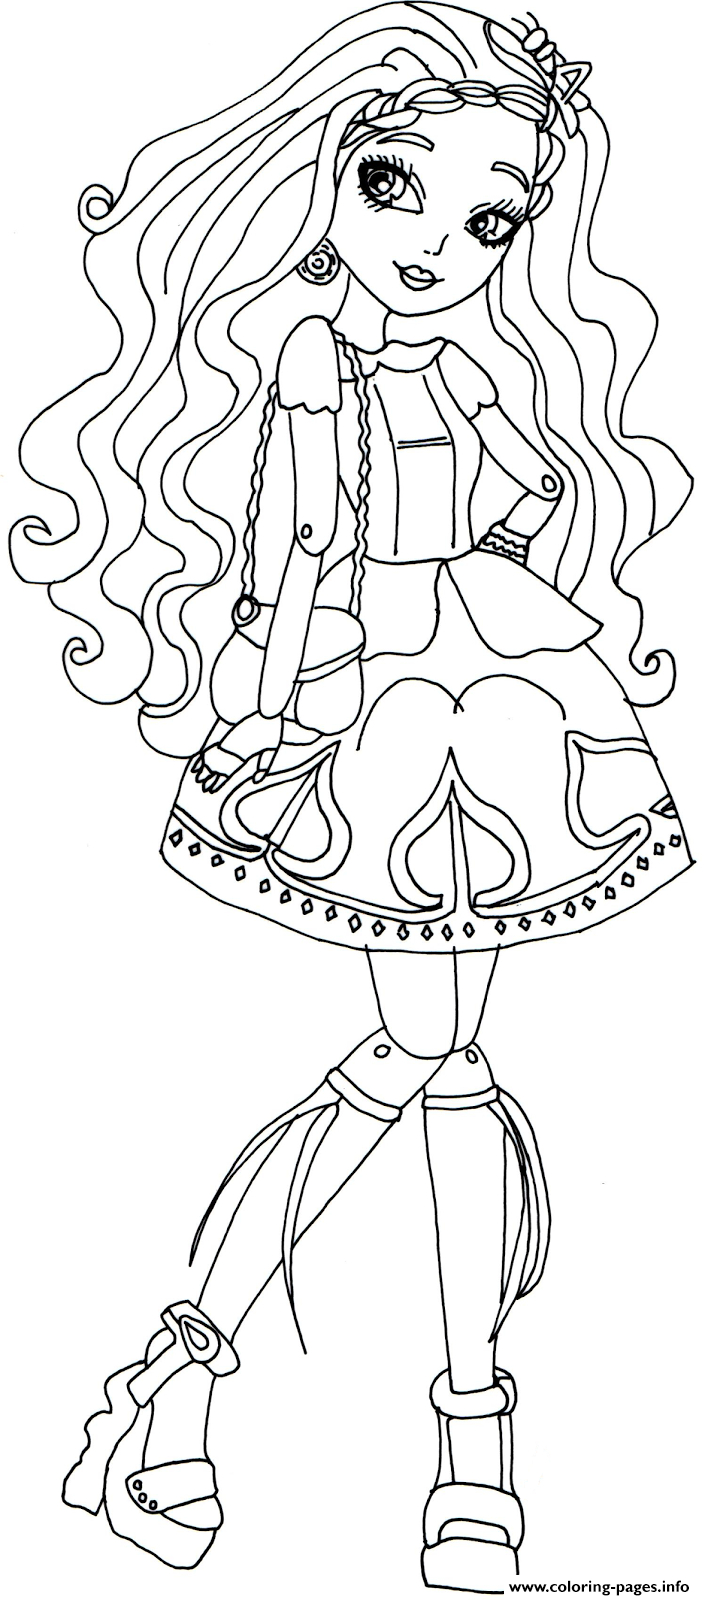 Madeline Coloring Pages Printable Ever After High Cedar Wood Coloring Pages Printable